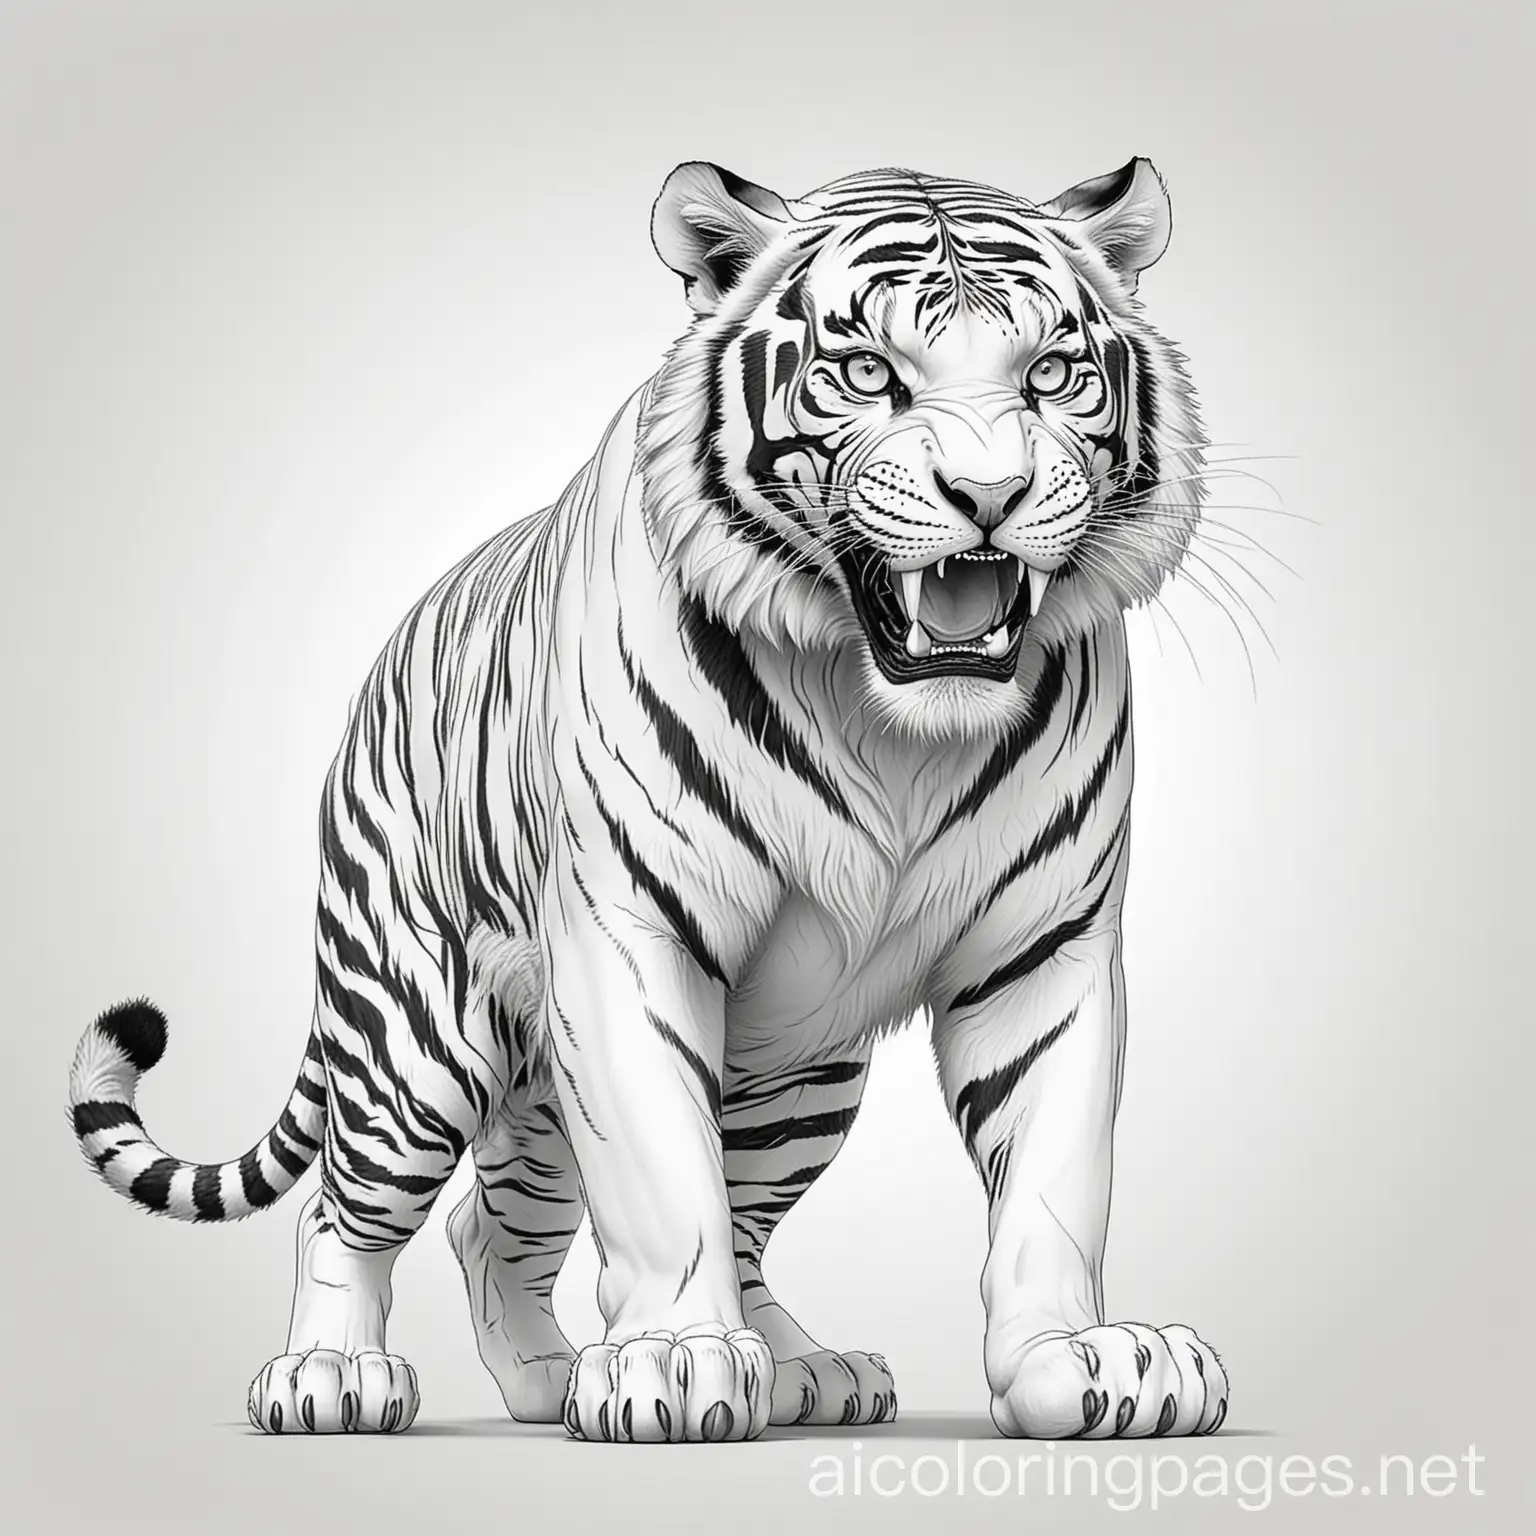 full body of a big big scary tiger who is ready to attack an animal with open mouth. in cartoon sytle Coloring Page, black and white, line art, white background, Simplicity, Ample White Space. The background of the coloring page is plain white to make it easy for young children to color within the lines. The outlines of all the subjects are easy to distinguish, making it simple for kids to color without too much difficulty, Coloring Page, black and white, line art, white background, Simplicity, Ample White Space. The background of the coloring page is plain white to make it easy for young children to color within the lines. The outlines of all the subjects are easy to distinguish, making it simple for kids to color without too much difficulty, Coloring Page, black and white, line art, white background, Simplicity, Ample White Space. The background of the coloring page is plain white to make it easy for young children to color within the lines. The outlines of all the subjects are easy to distinguish, making it simple for kids to color without too much difficulty
, Coloring Page, black and white, line art, white background, Simplicity, Ample White Space. The background of the coloring page is plain white to make it easy for young children to color within the lines. The outlines of all the subjects are easy to distinguish, making it simple for kids to color without too much difficulty